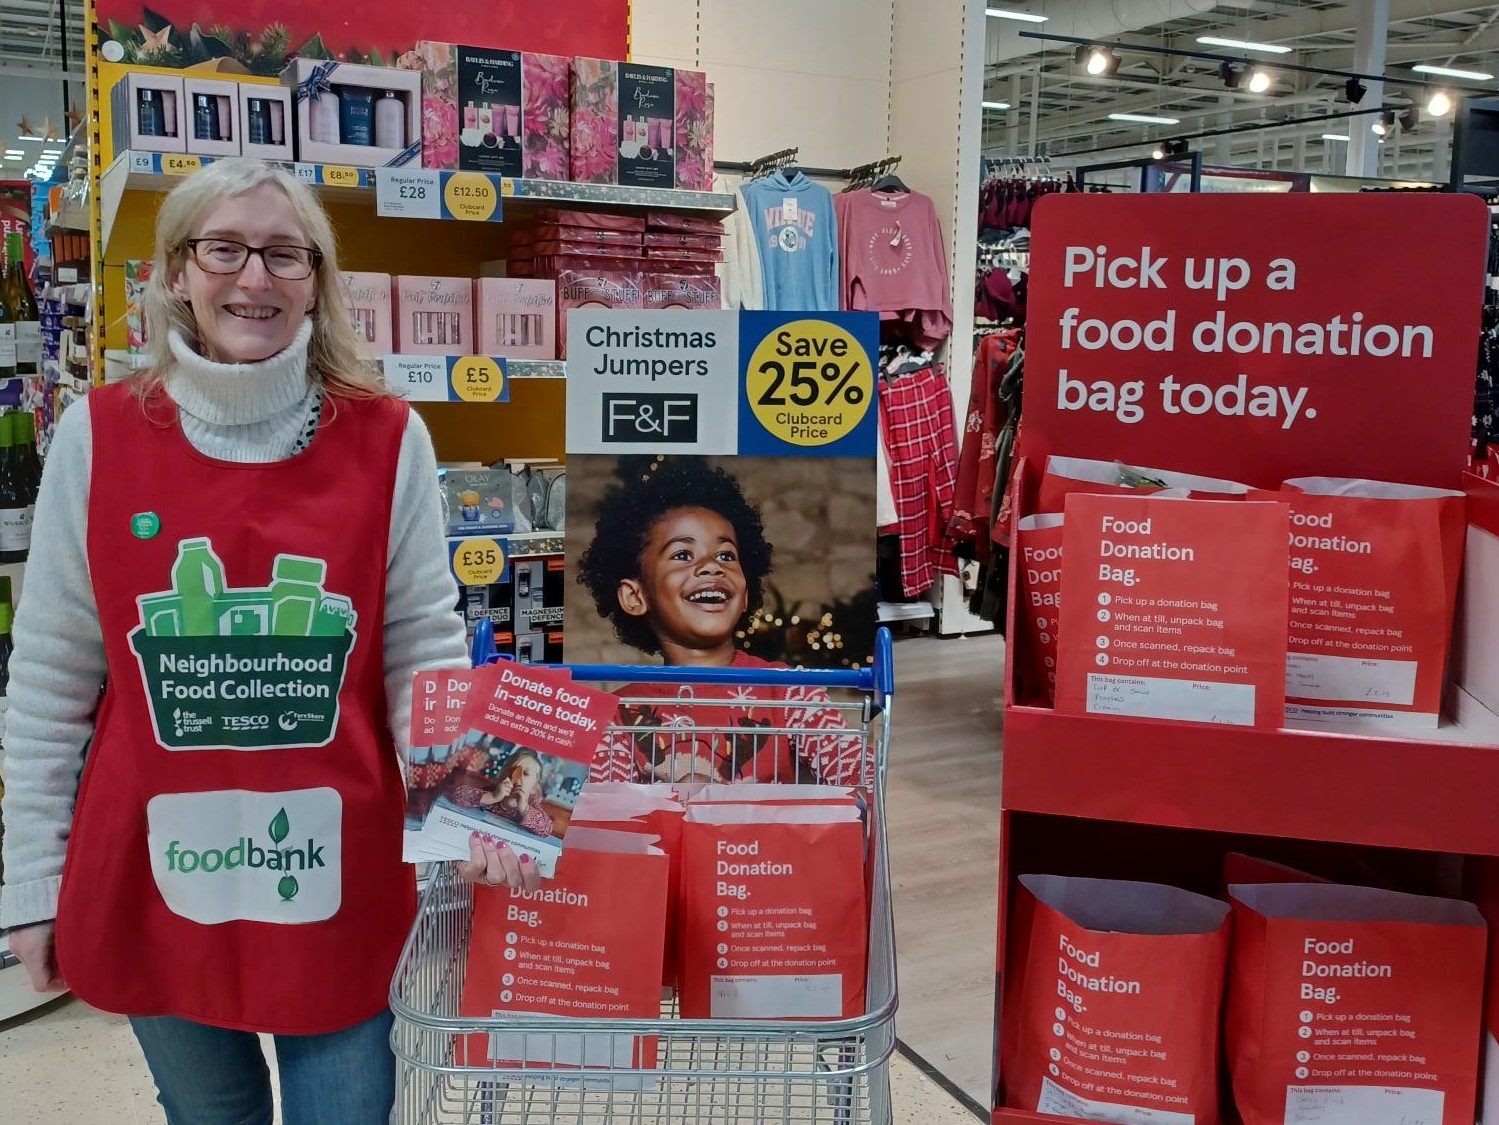 Cathy Fitzgerald, Vodafone employee, volunteering for the Trussell Trust food bank charity at a Tesco store